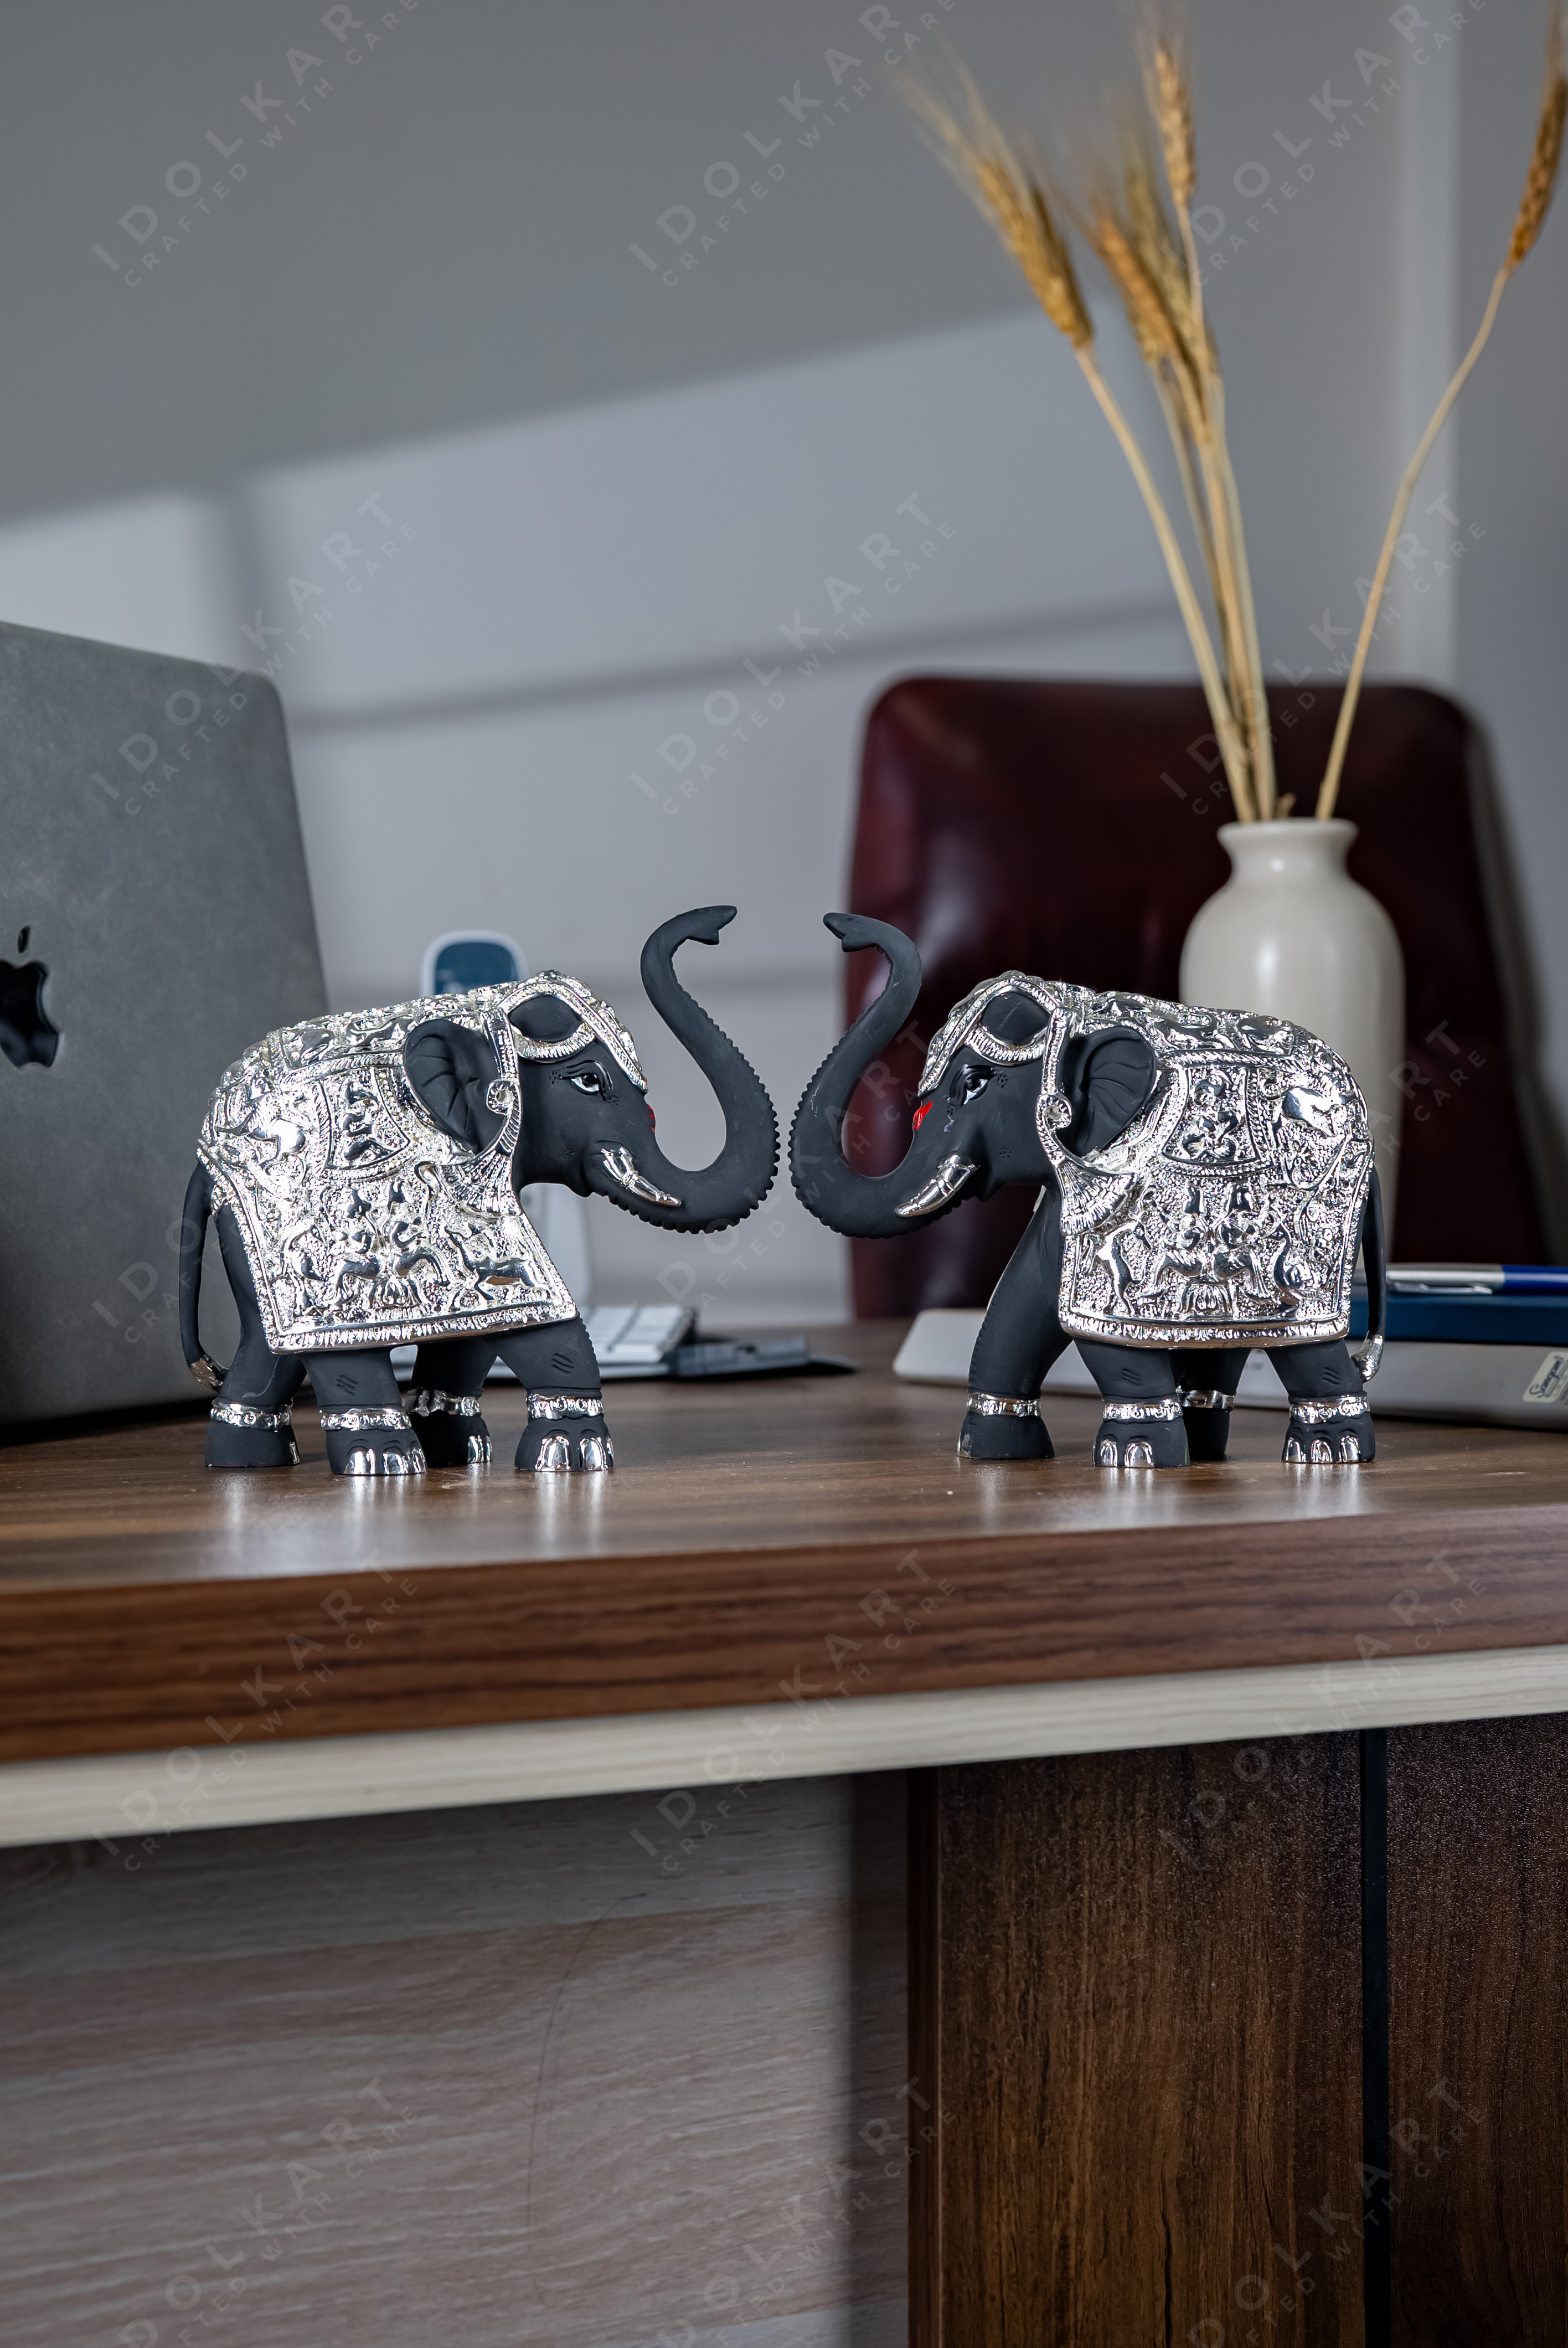 Products Pure Gold & Silver Coated Elephant Showpiece for Gifts Home Decor Marriages House Warming Diwali | Elephant Idol with Trunk Up For Vastu & Feng Shui | Pure Gold & Silver Home Decor Hathi - Set of 2